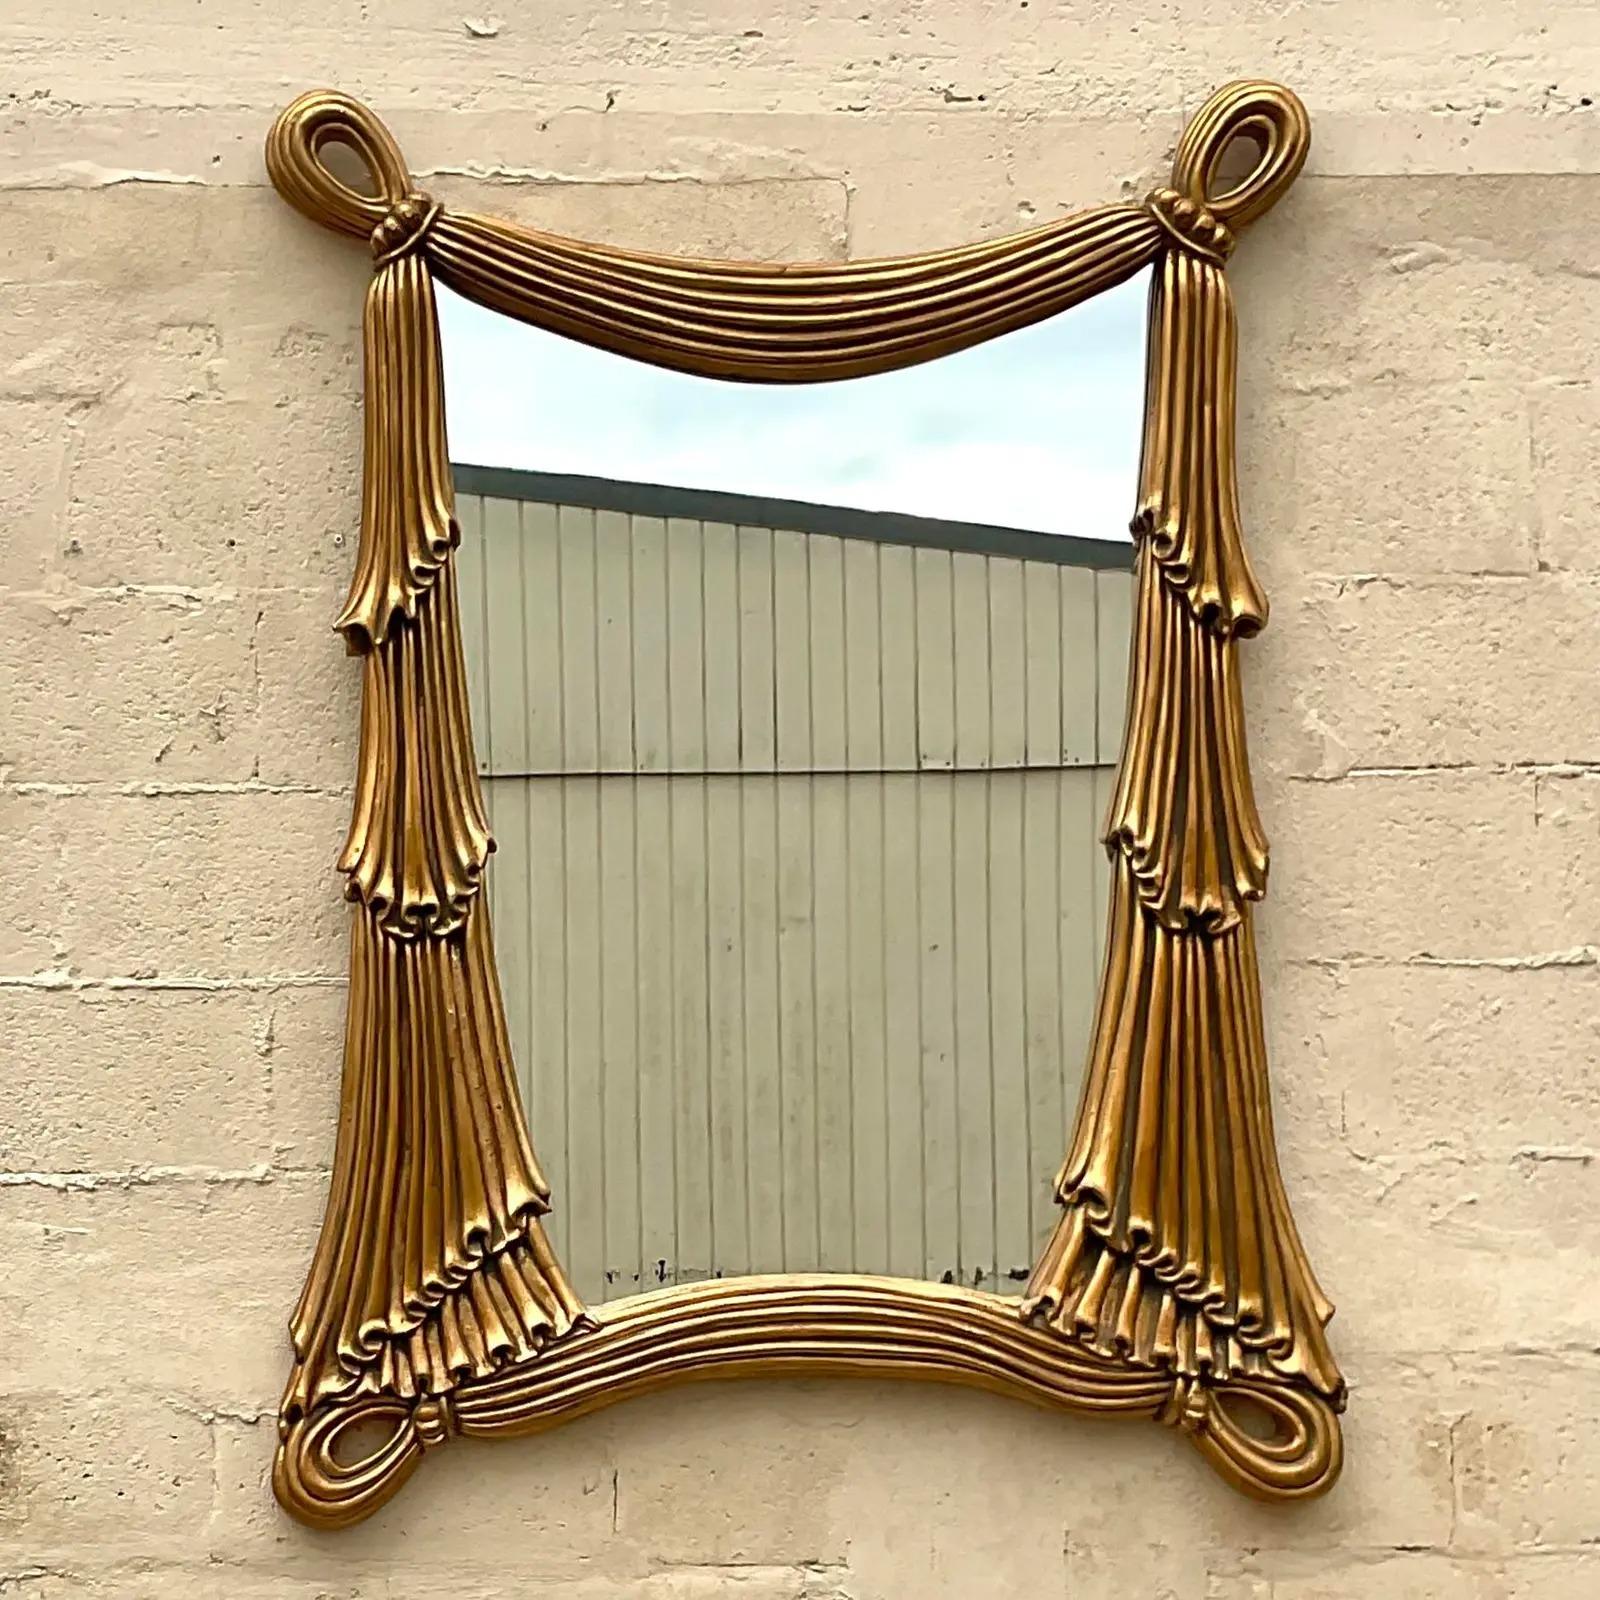 A fantastic vintage Regency wall mirror. A chic swag design in a bright gilt finish. Acquired from a Palm Beach estate.